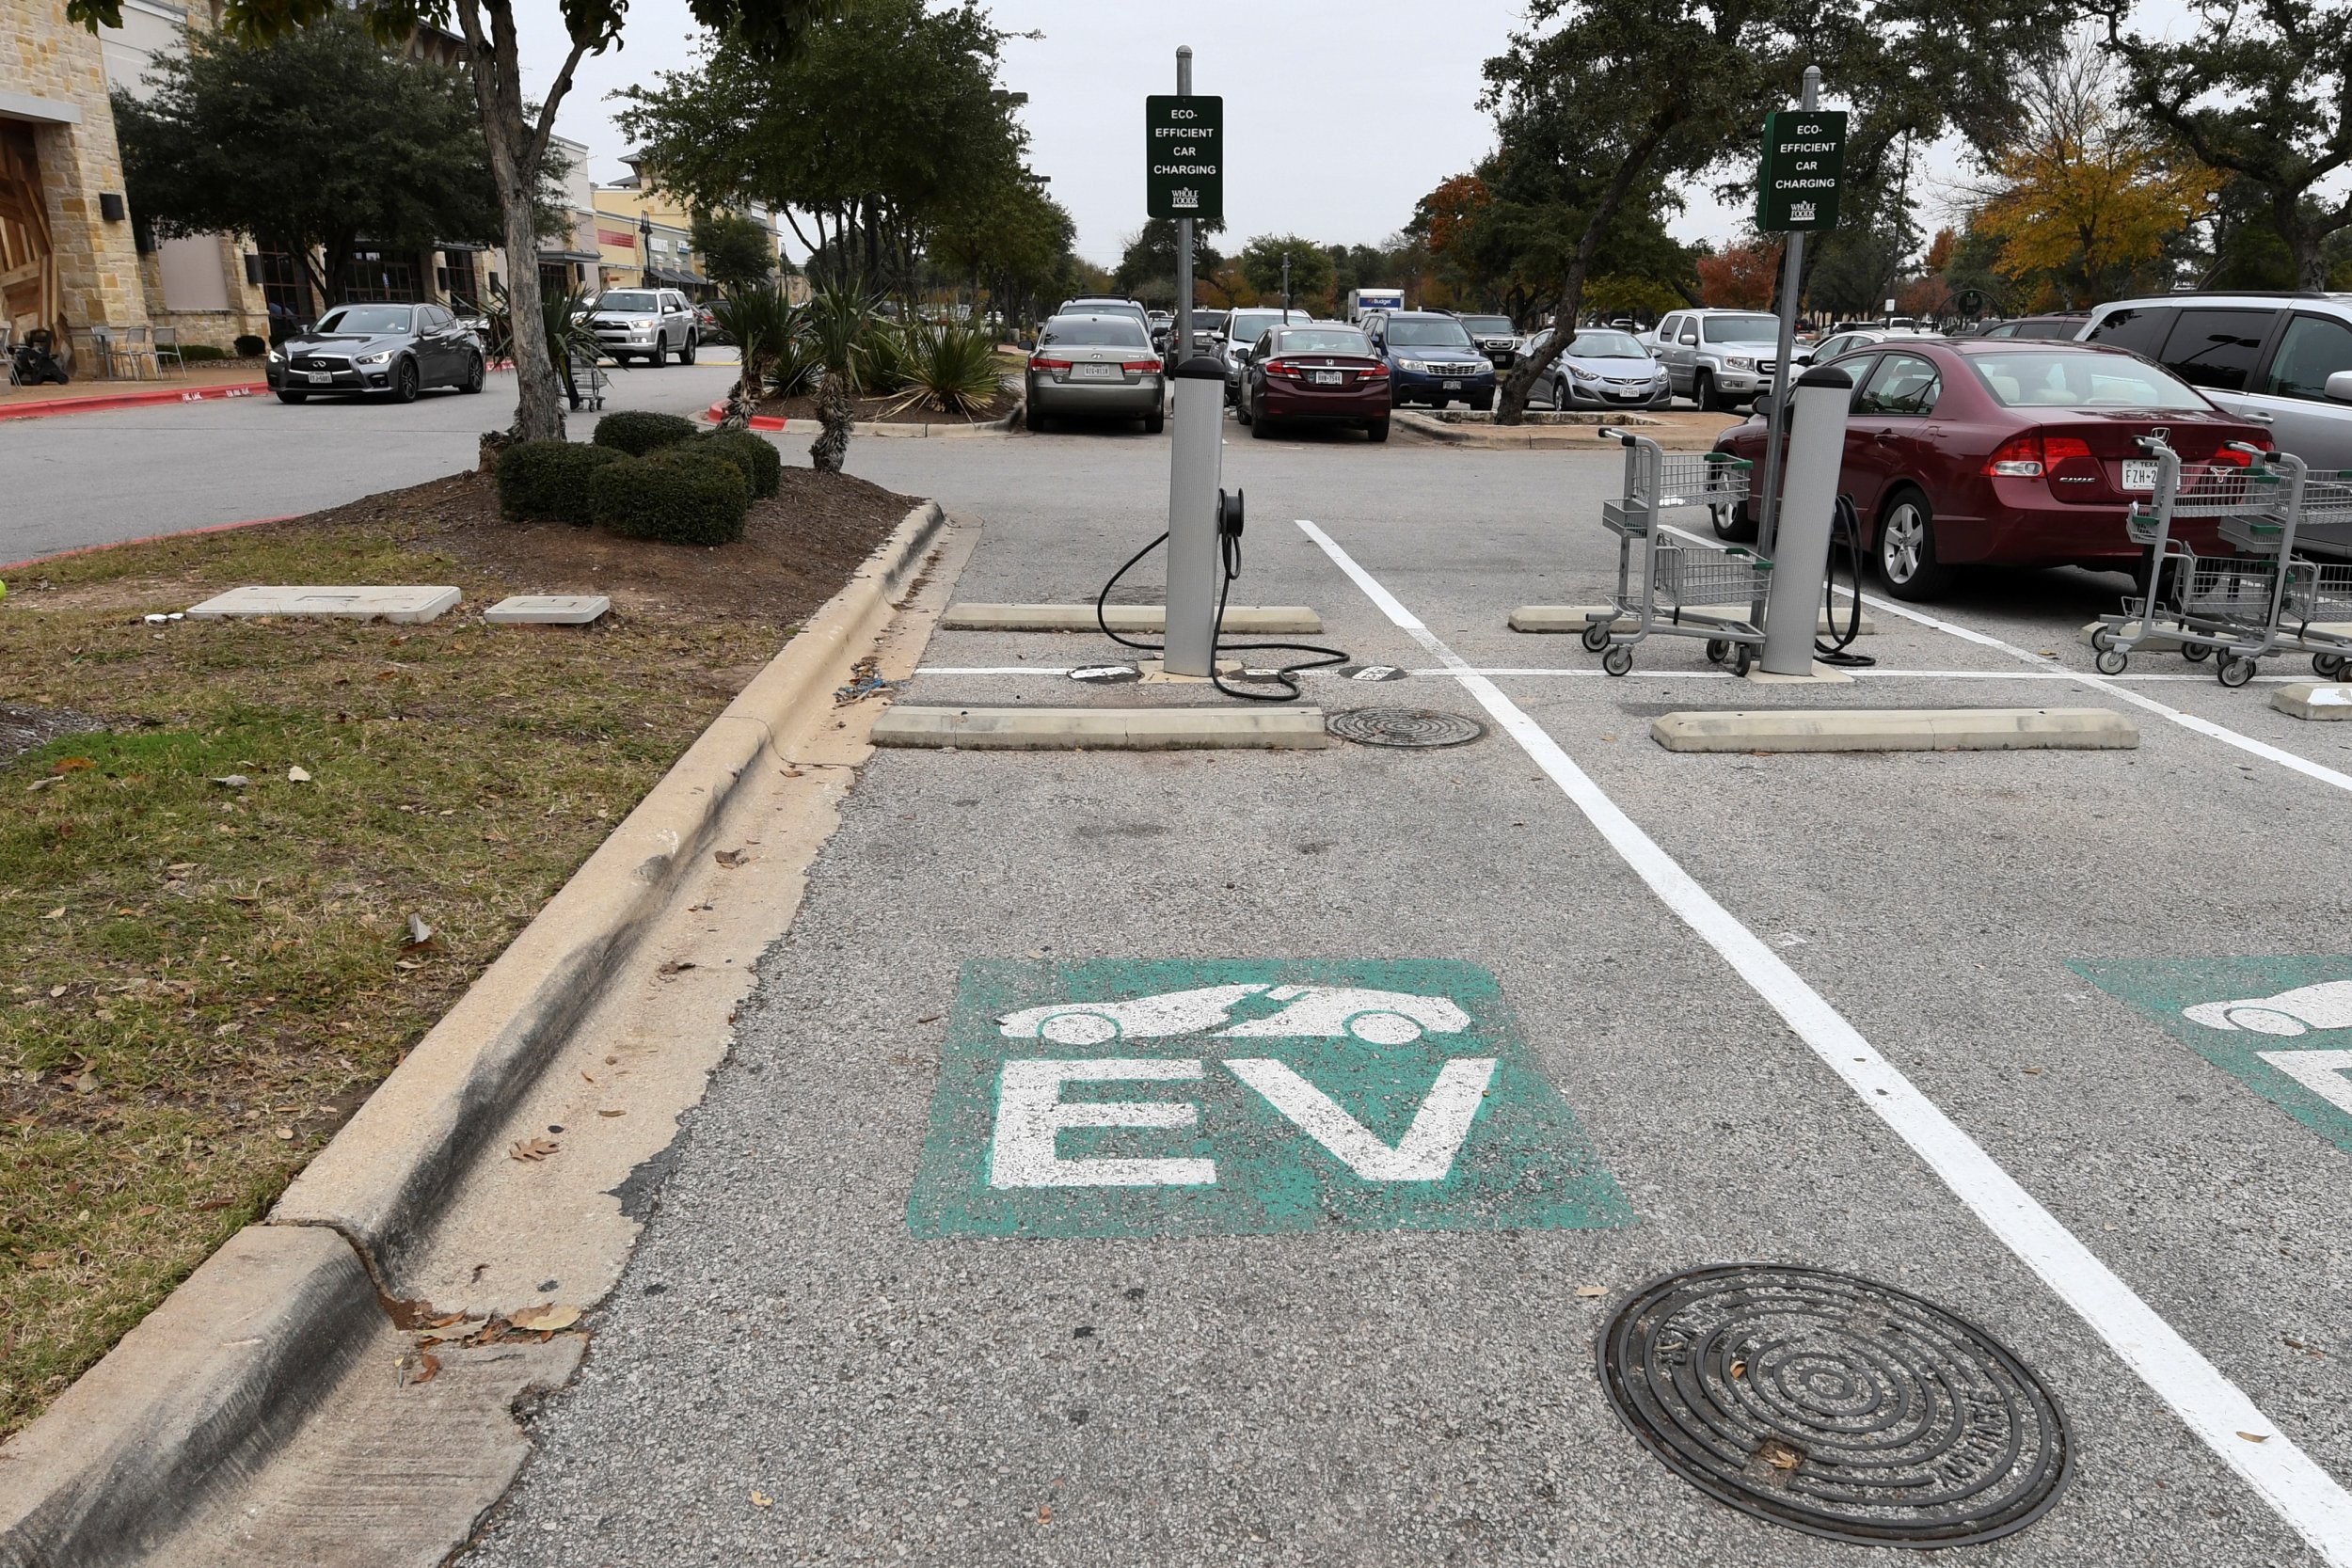 new-york-state-to-offer-2-000-rebate-on-purchase-of-electric-vehicles-report